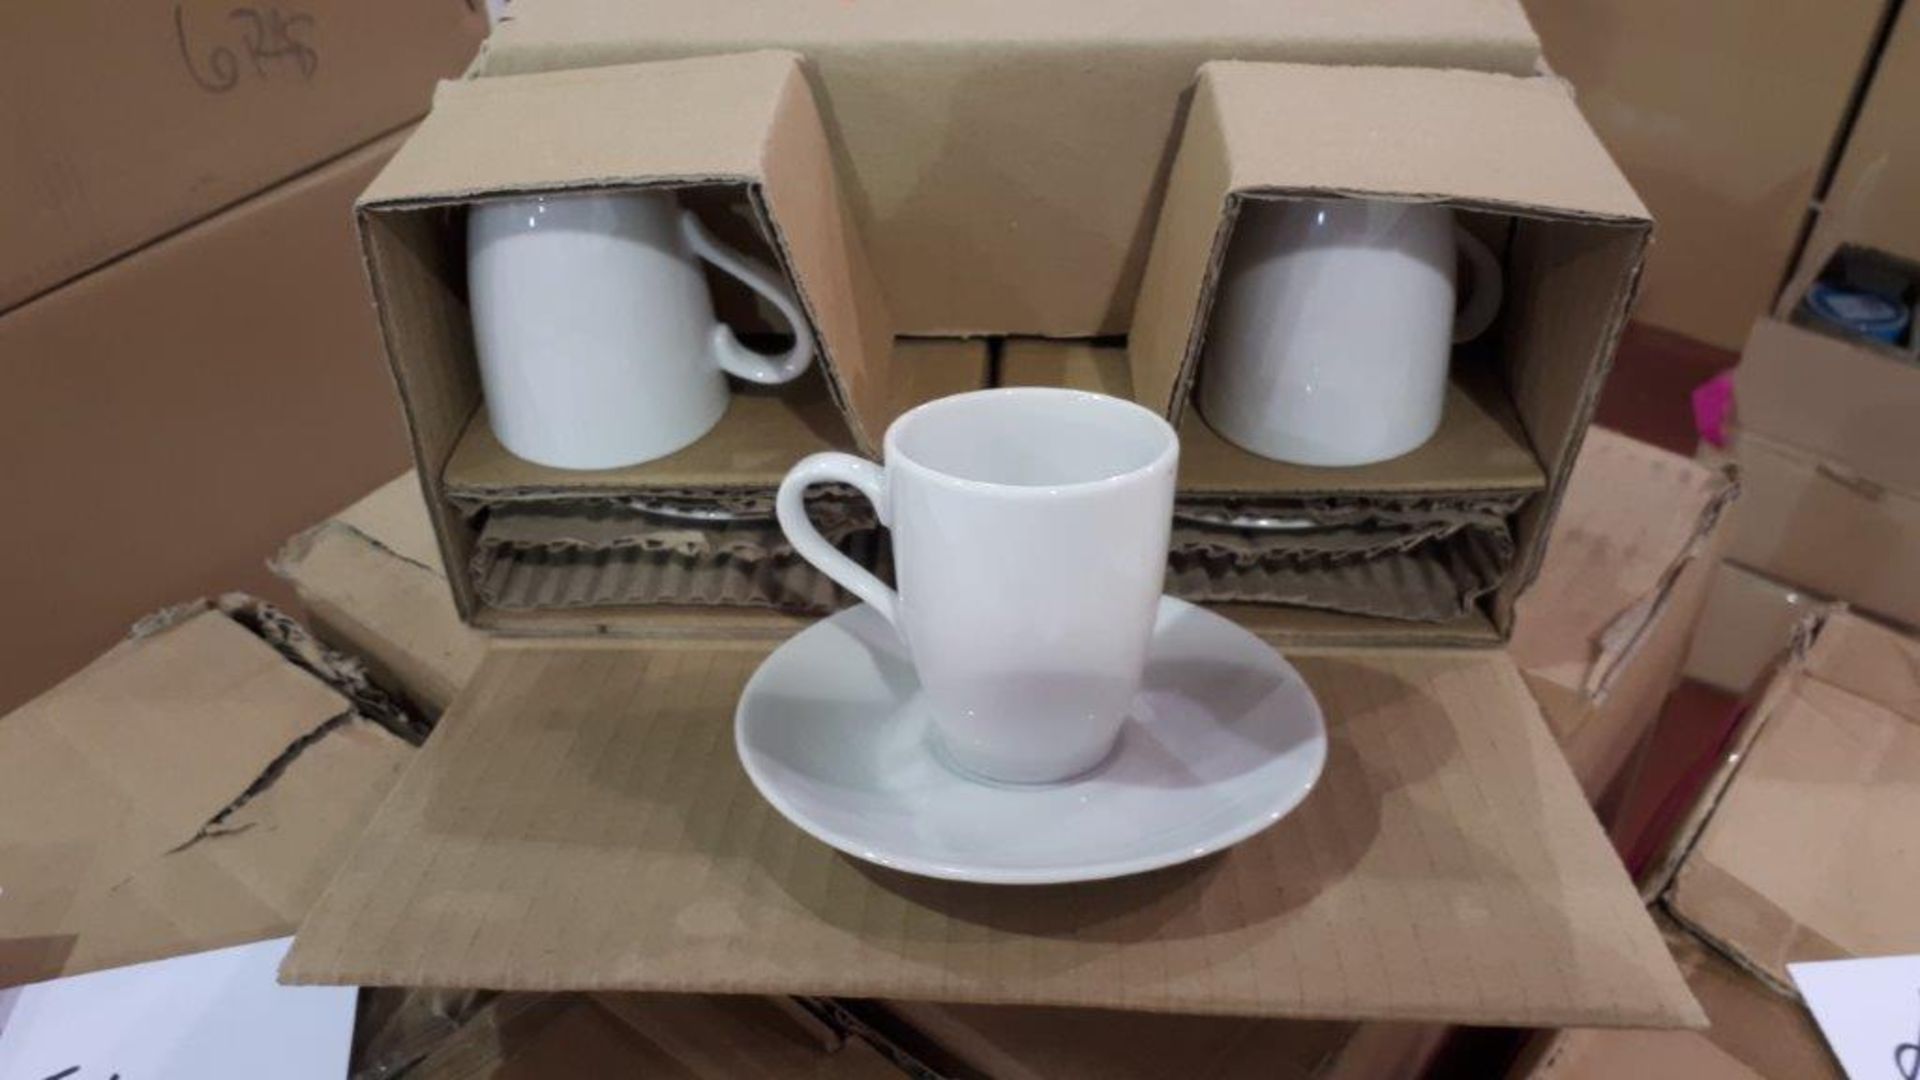 LOT: 10 BOXES OF CUP & SAUCER SETS (6 sets/box)